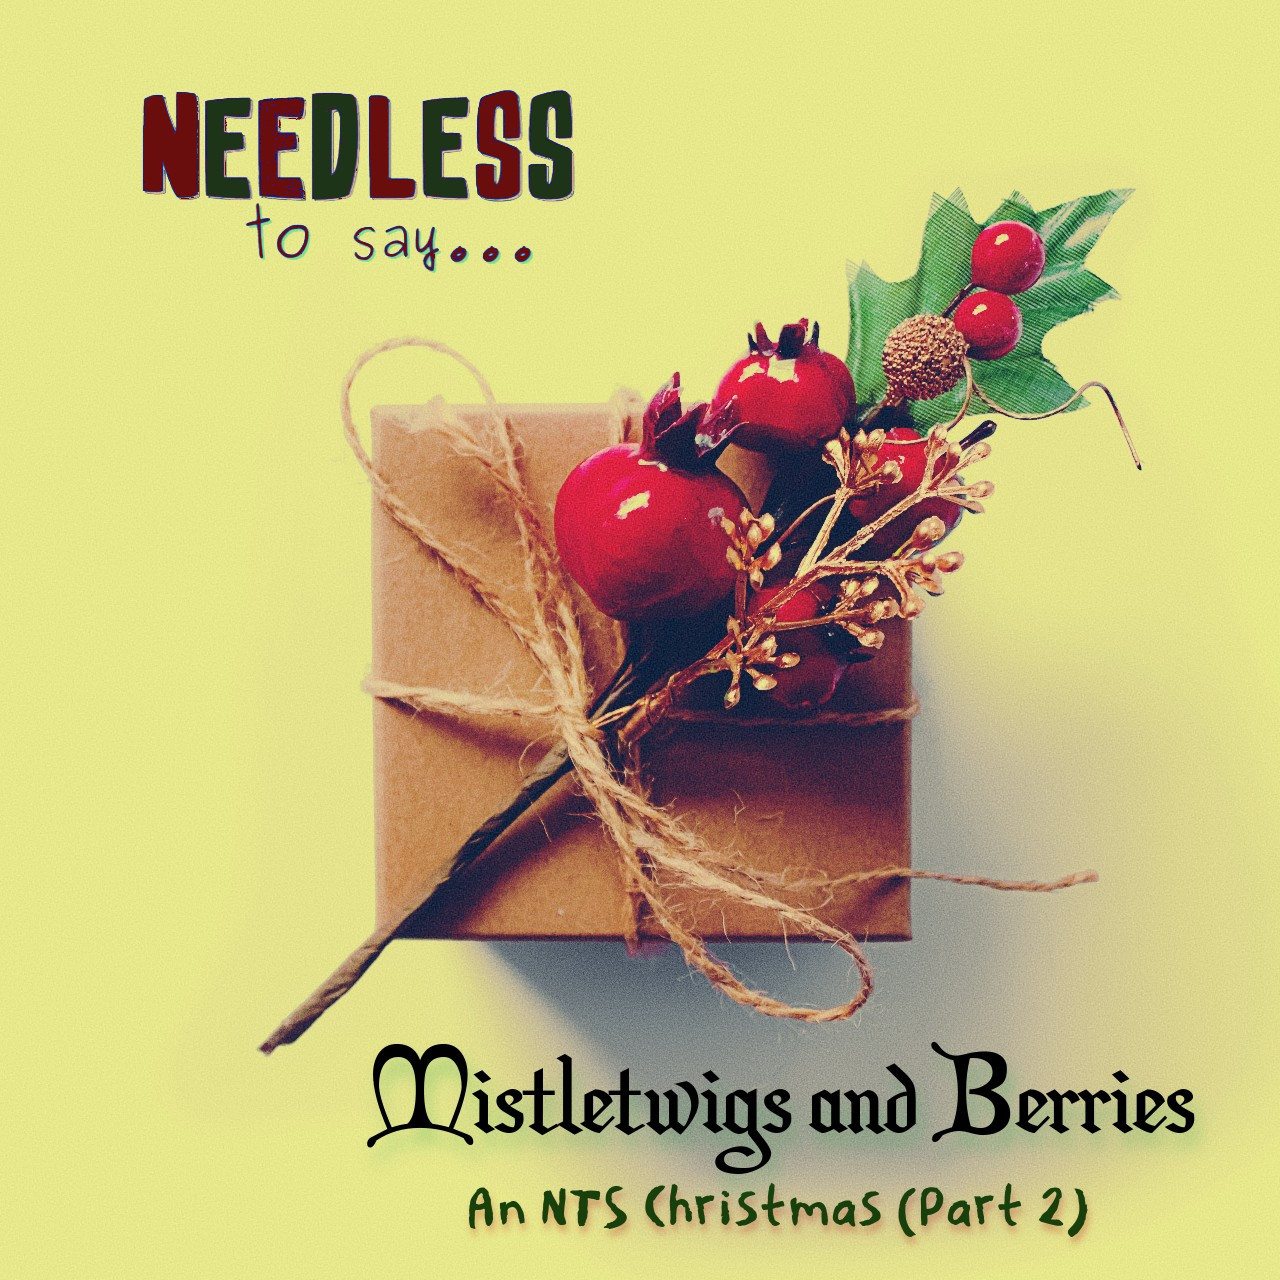 Mistletwigs and Berries: An NTS Christmas (Part 2) Image